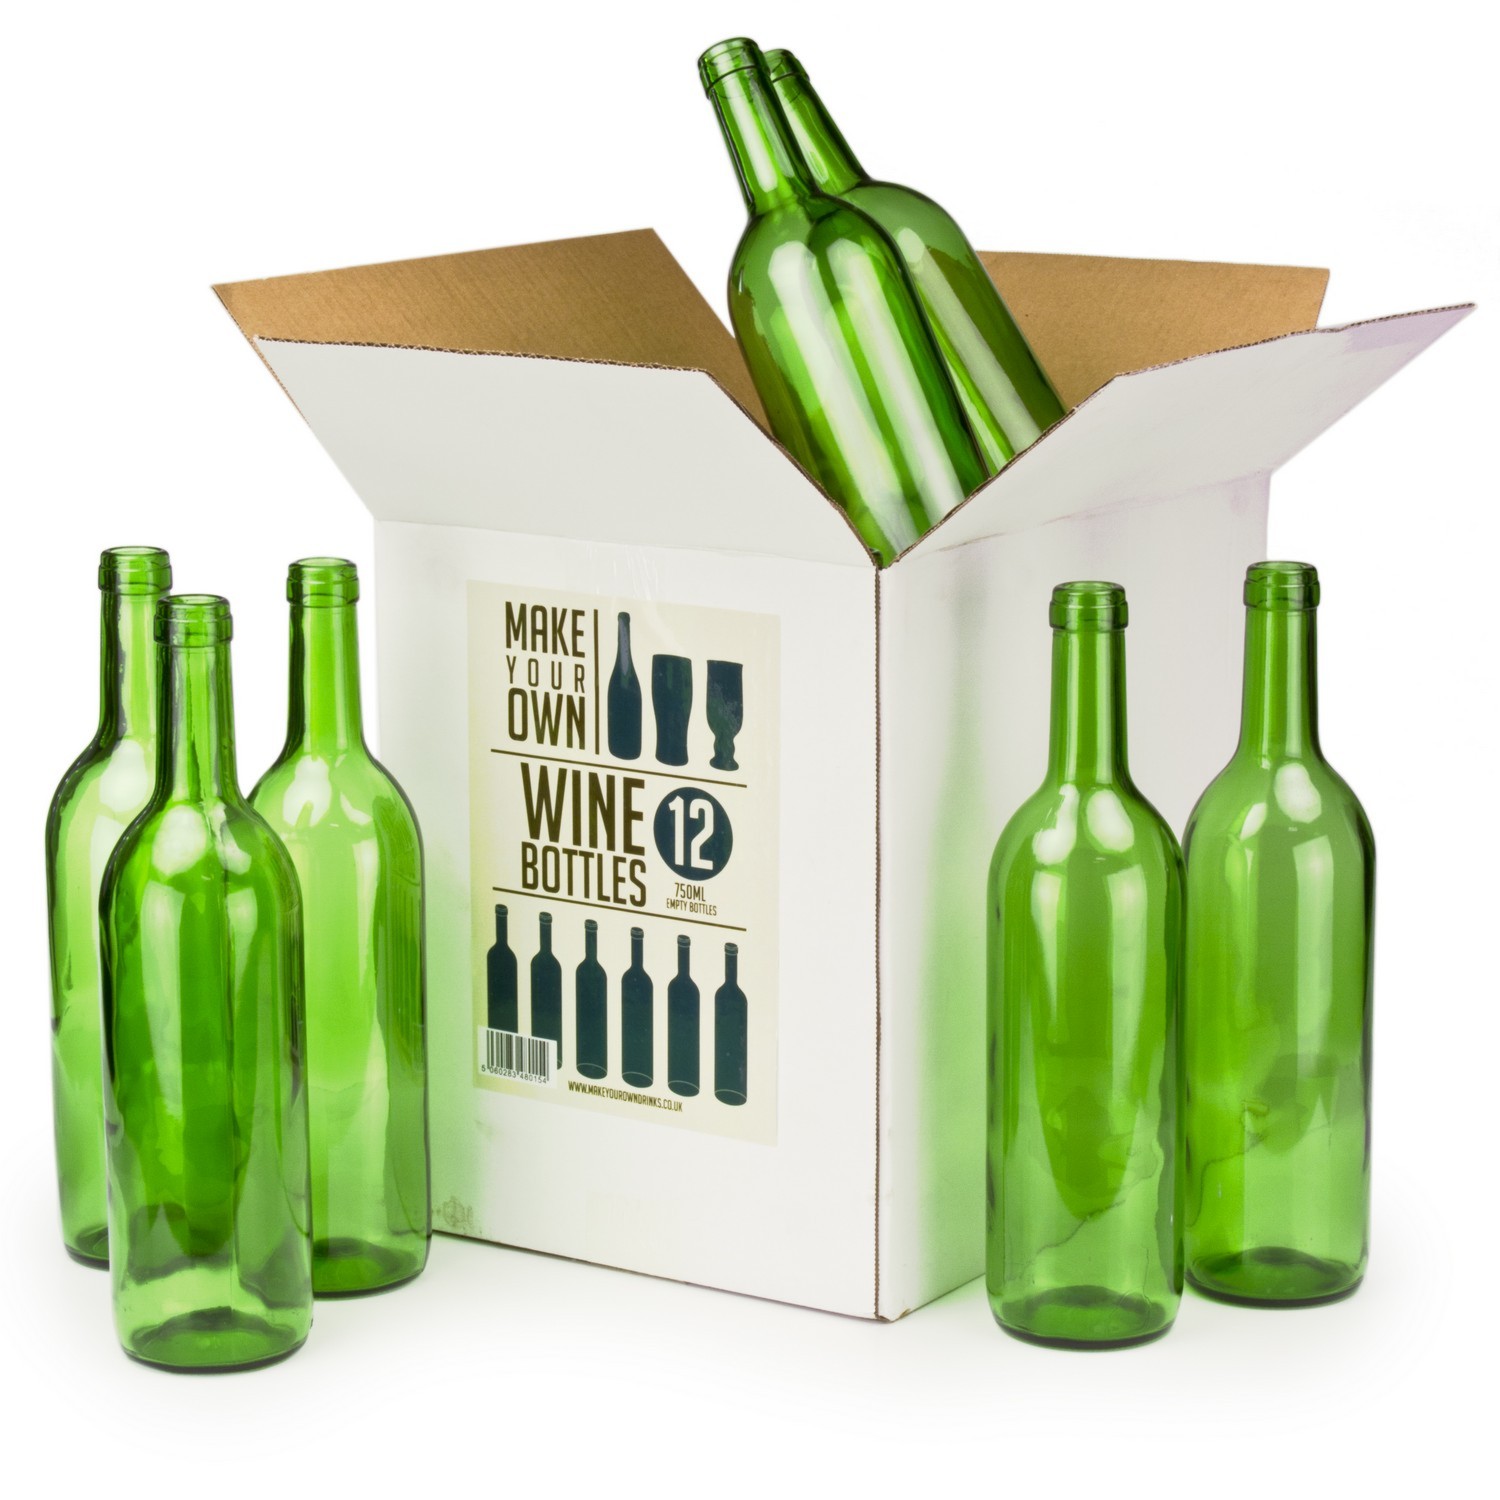 Make Your Own Green Empty Wine Bottle 750ml 12 Pack Image